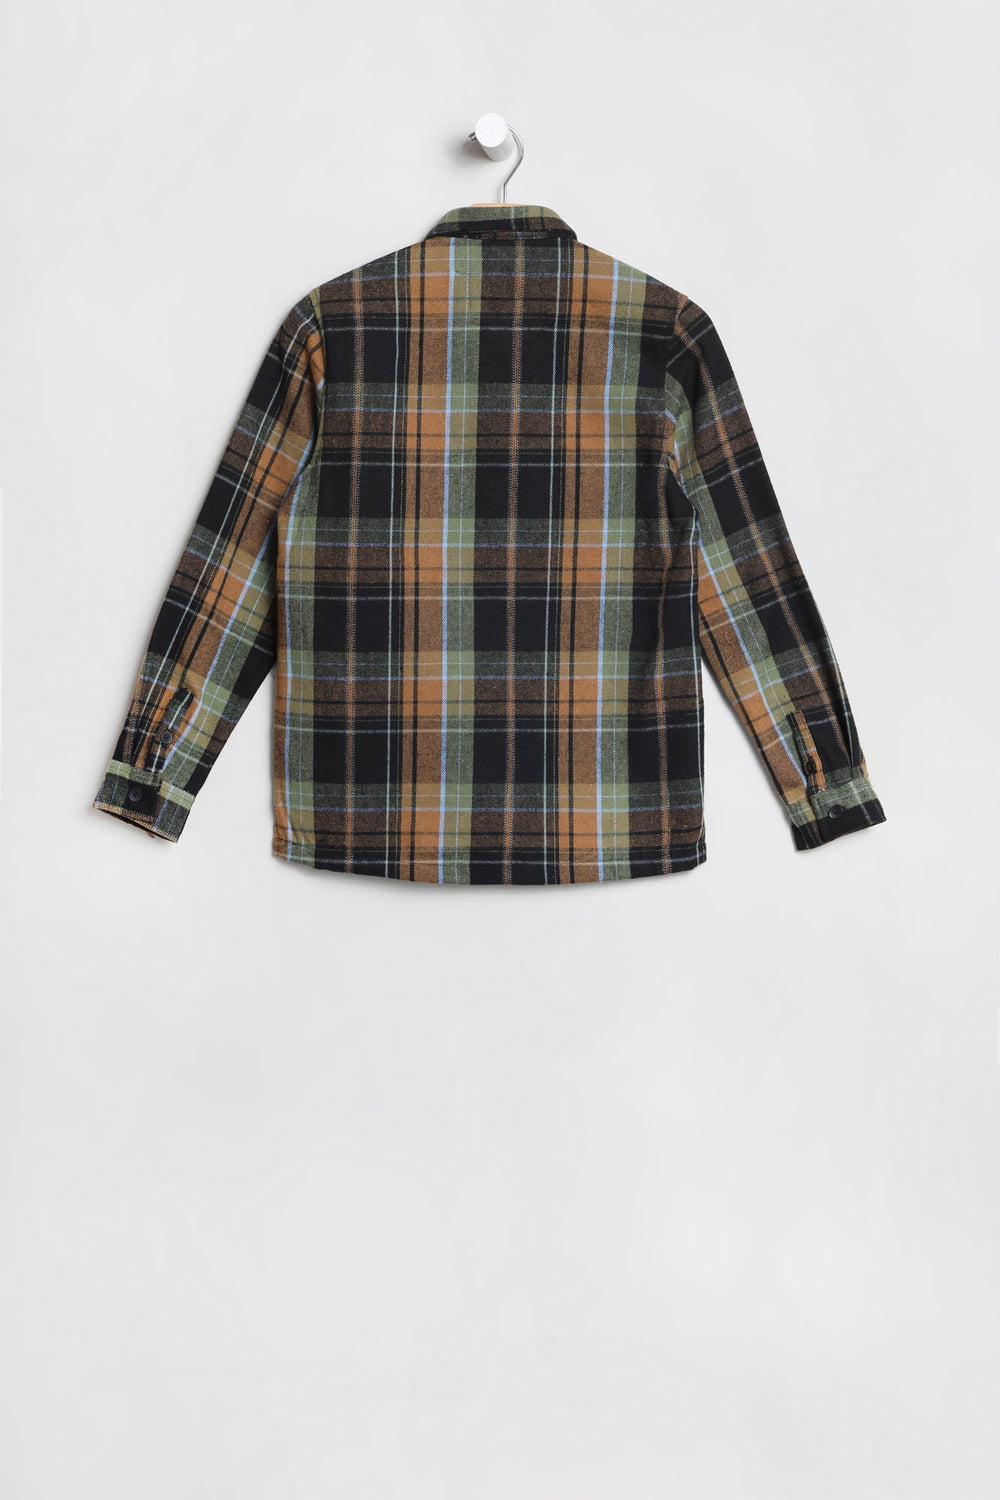 Amnesia Youth Plaid Button-Up Green